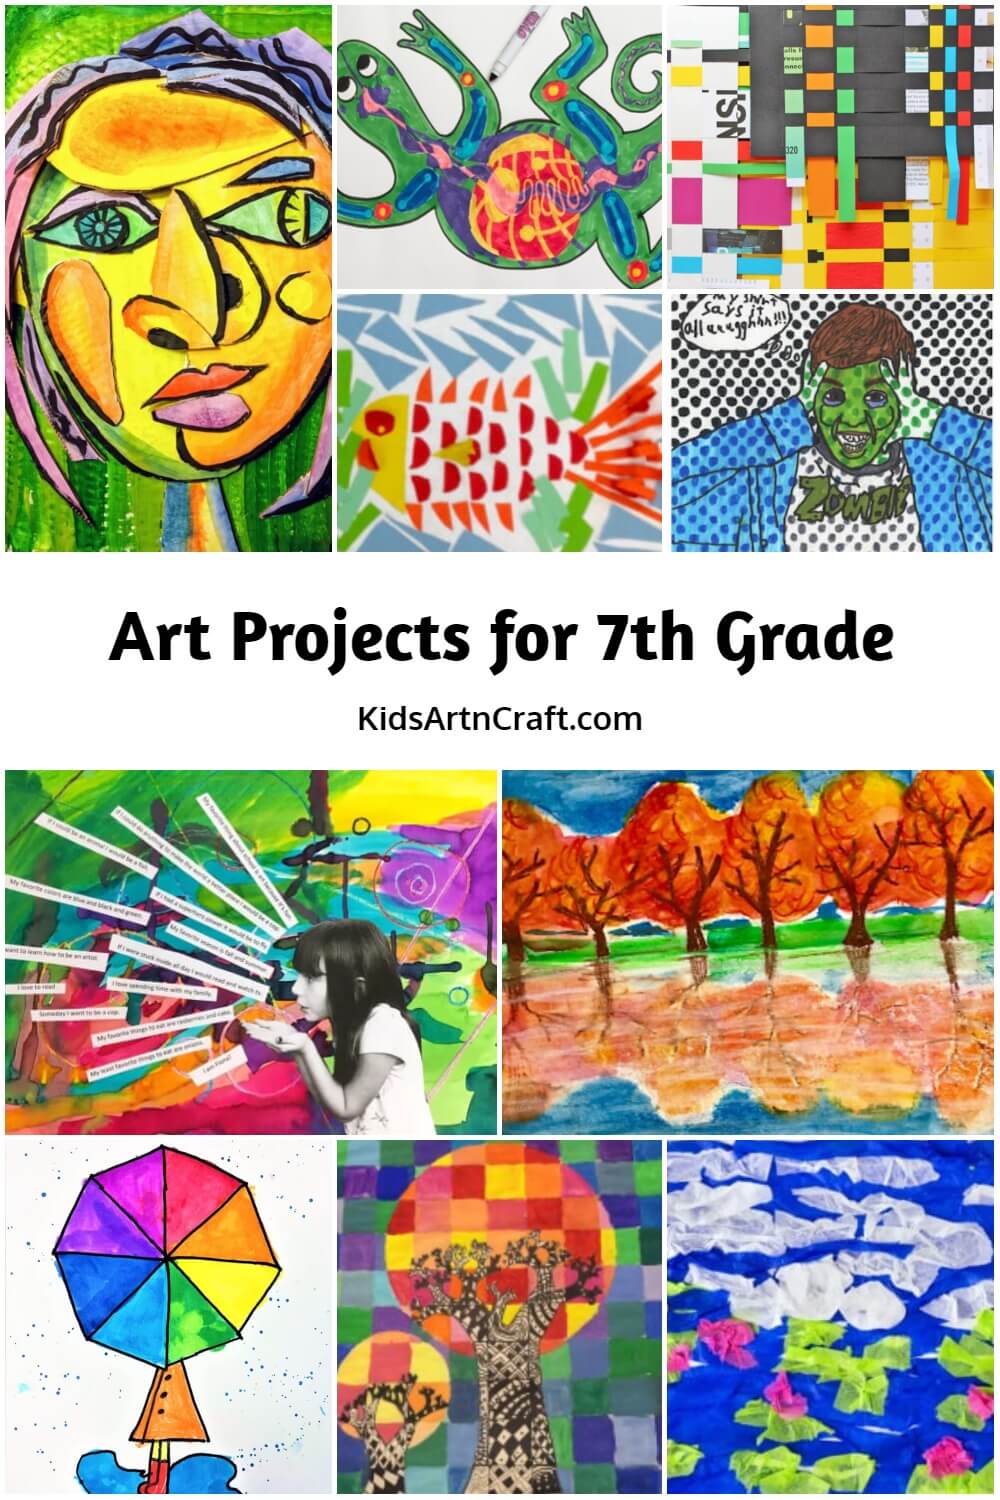 Art Projects for 7th Grade